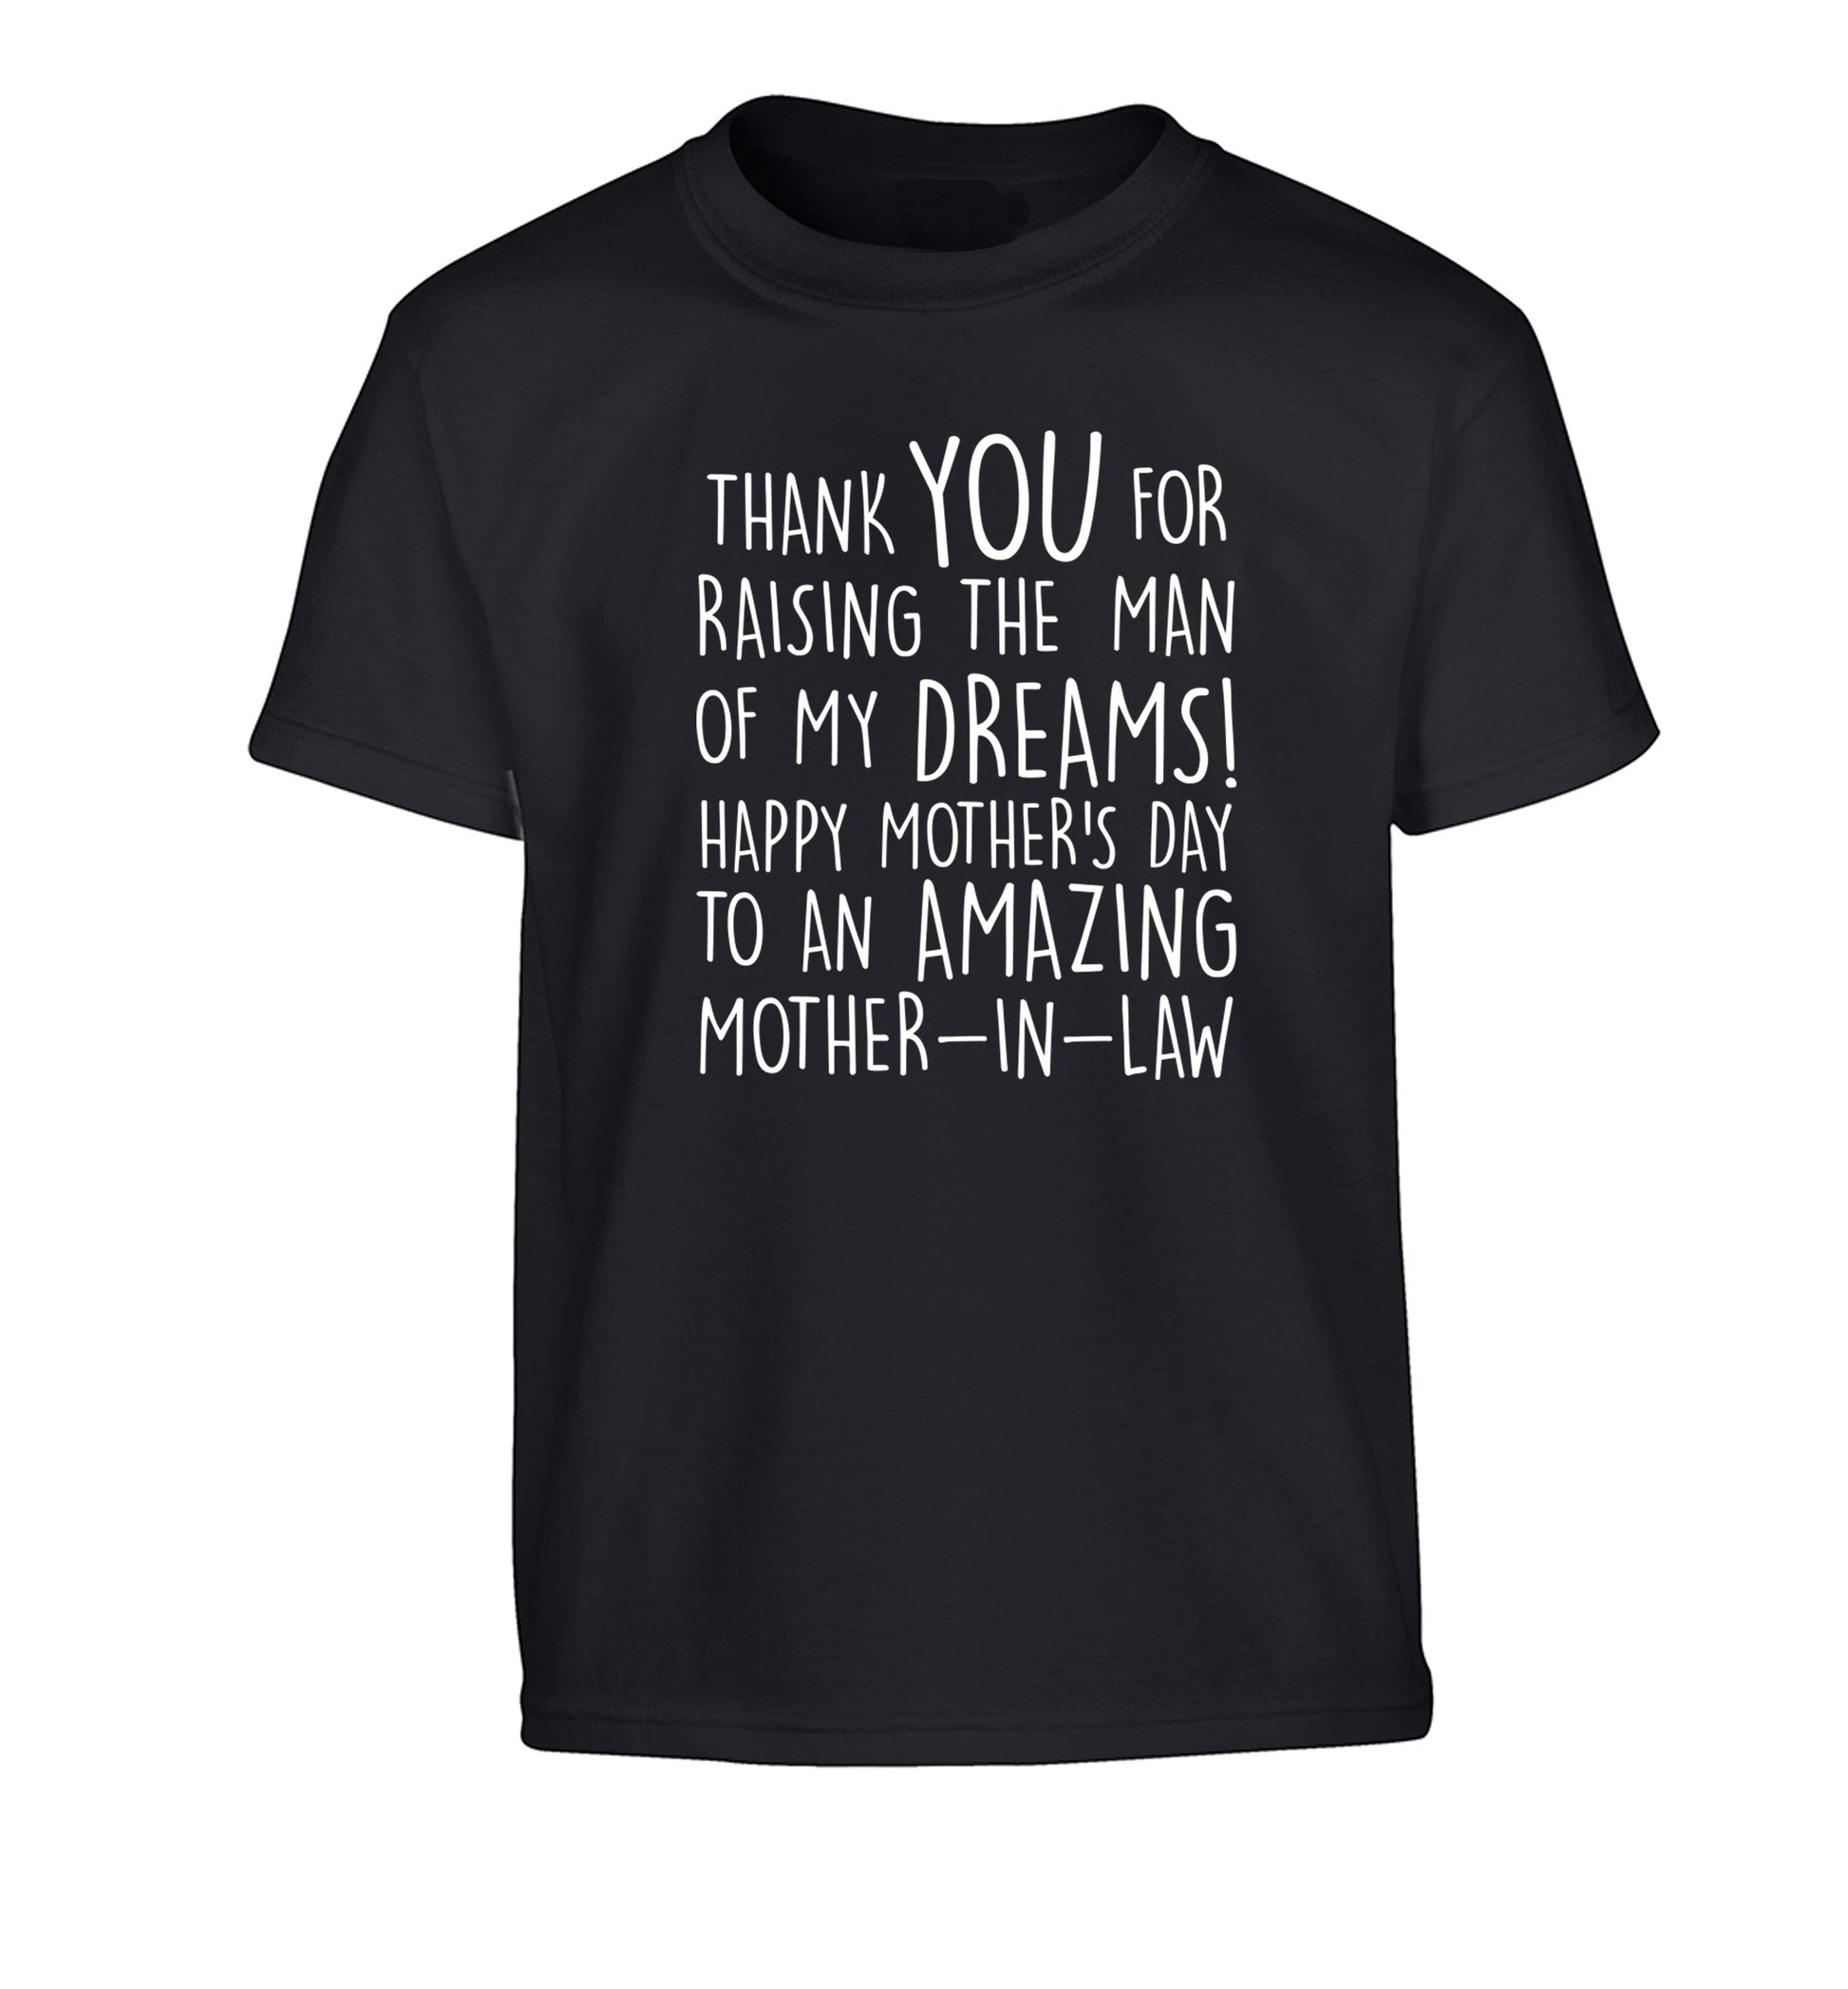 Thank you for raising the man of my dreams happy mother's day mother-in-law Children's black Tshirt 12-13 Years